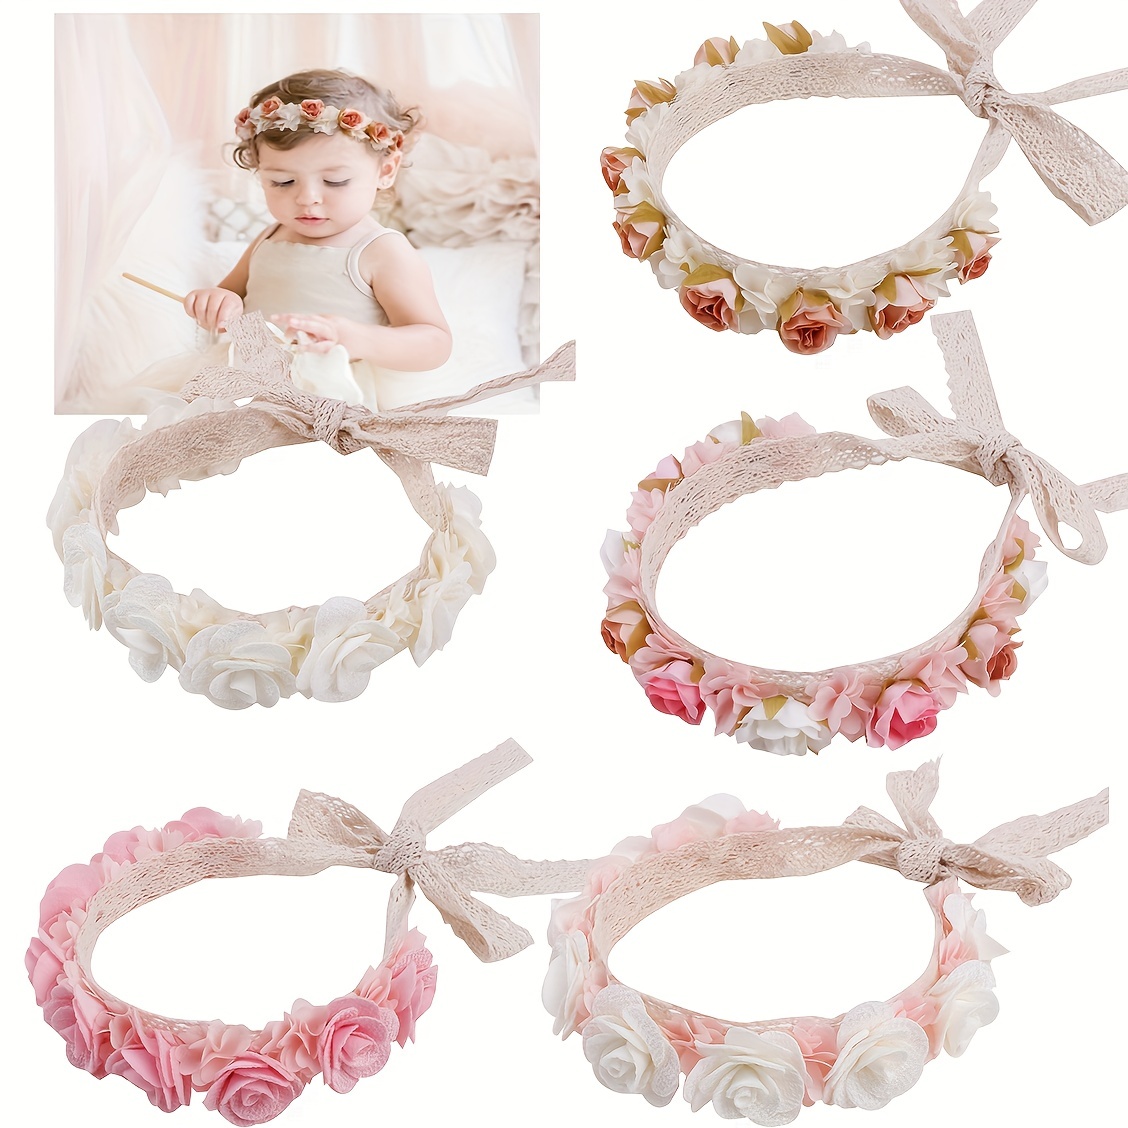 

Baby Floral Lacy Hairbands, Hair Accessories For Baby Girls Newborn Infant Toddlers Kids